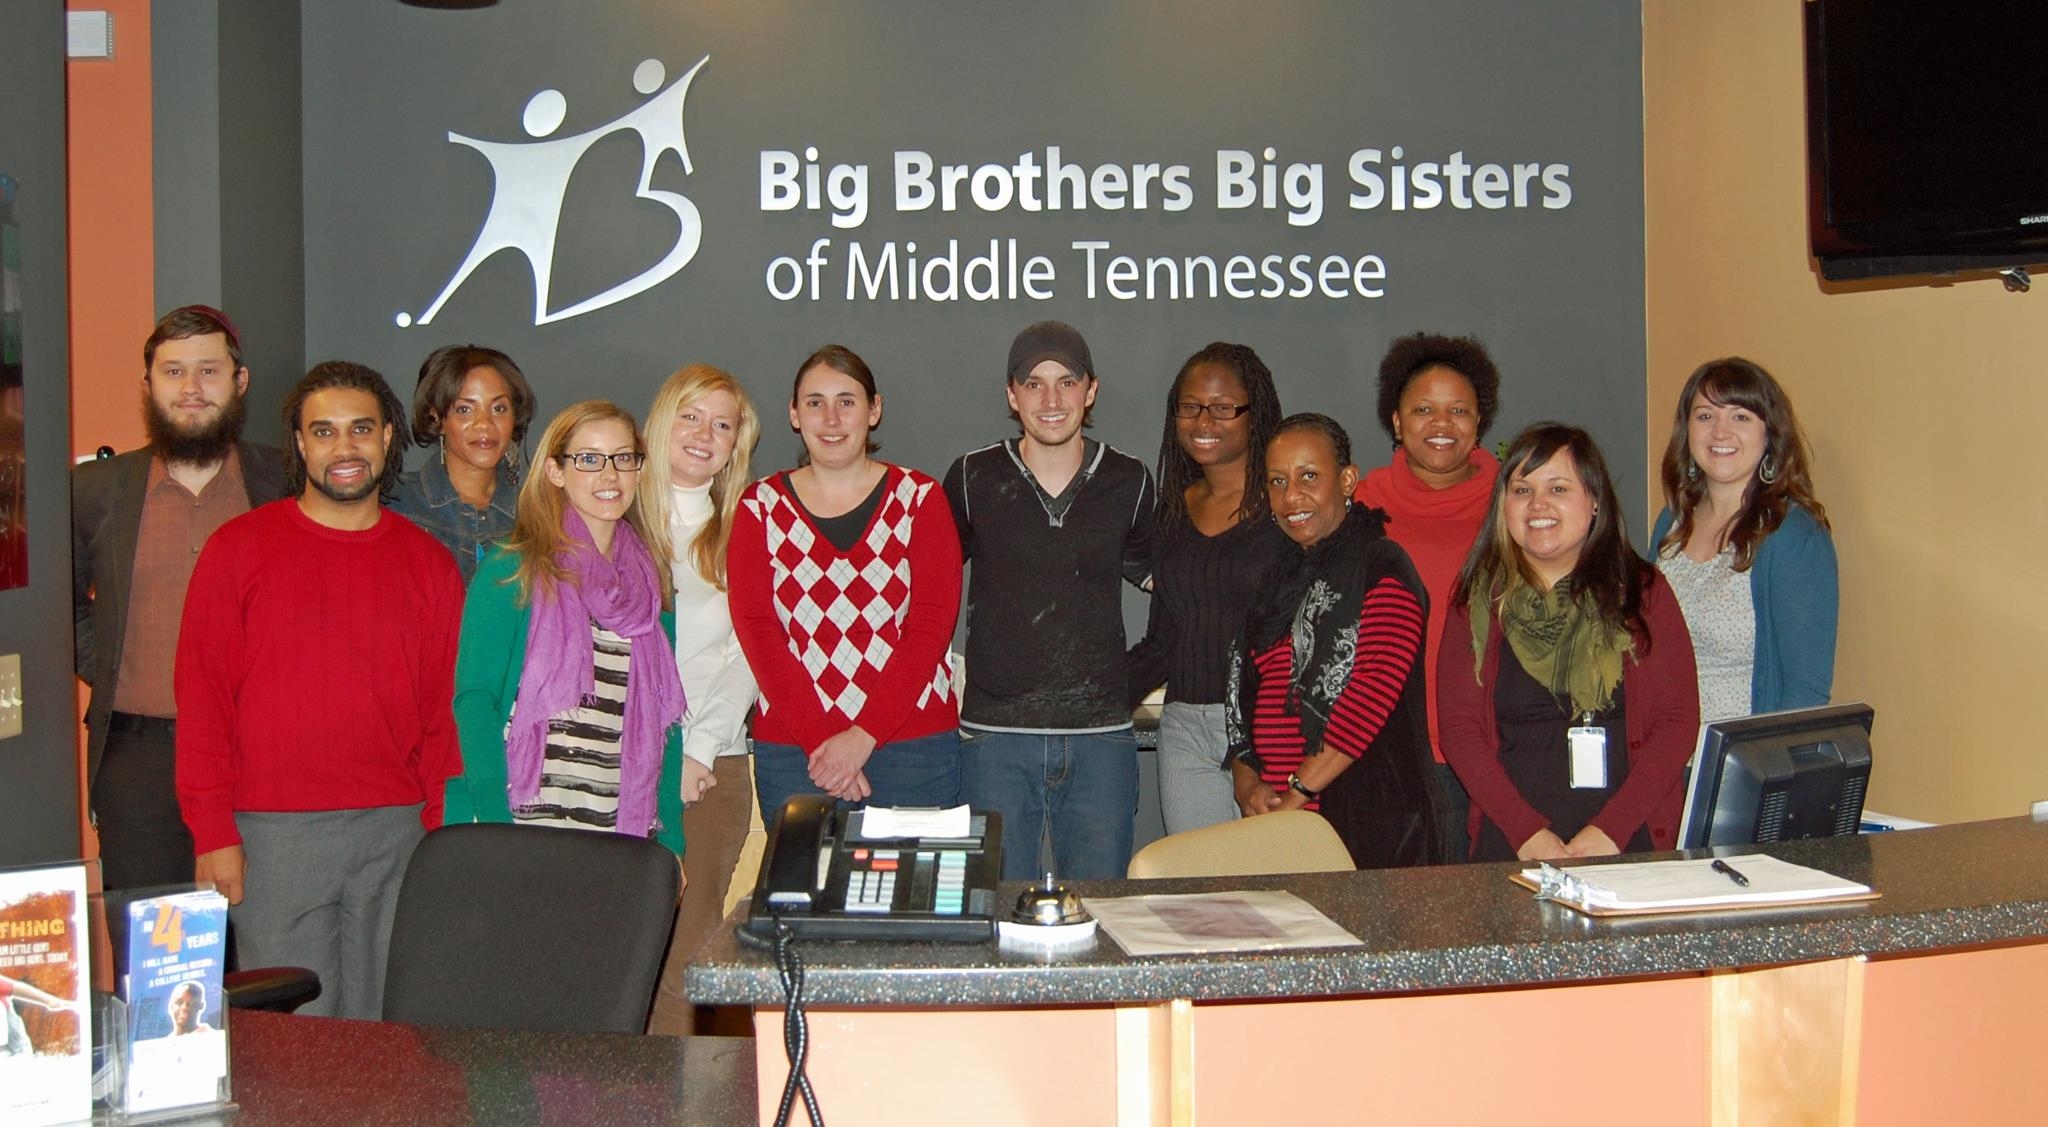 Singer/songwriter Greg Bates recently visited Big Brothers Big Sisters of Middle TN to meet with staff and learn more about the mentoring program.